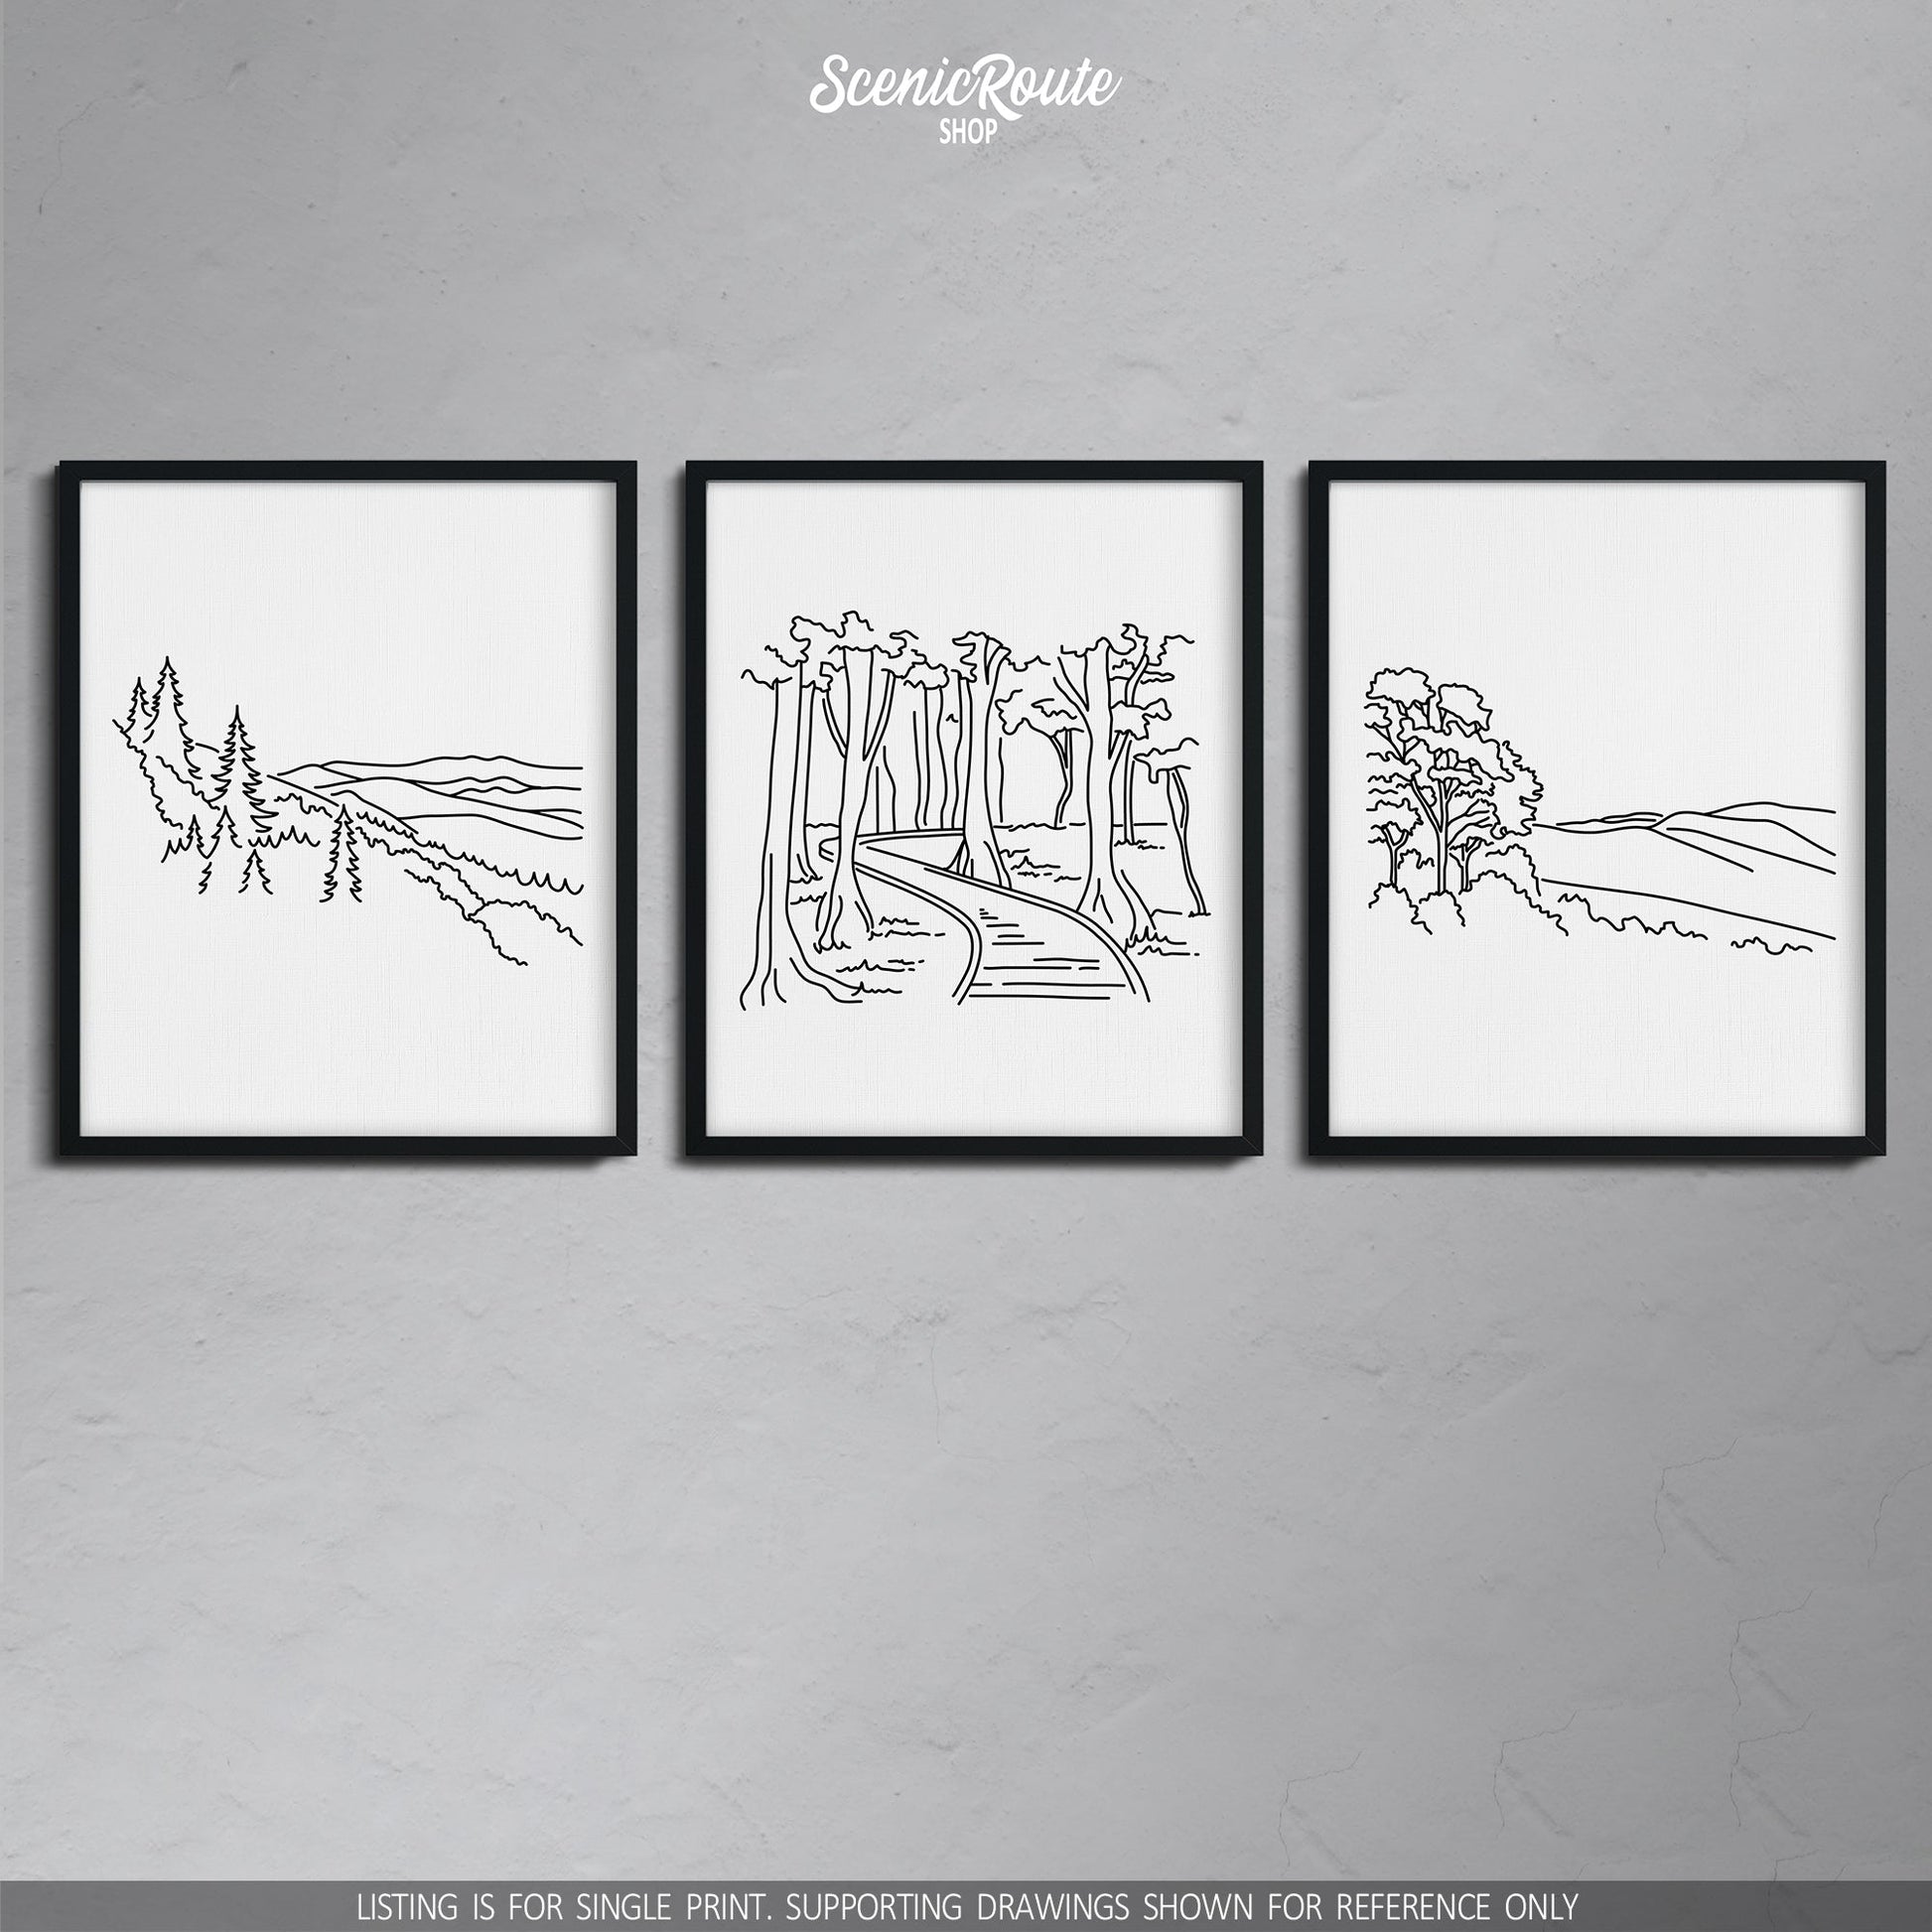 A group of three framed drawings on a wall. The line art drawings include Great Smoky Mountains National Park, Congaree National Park, and Shenandoah National Park